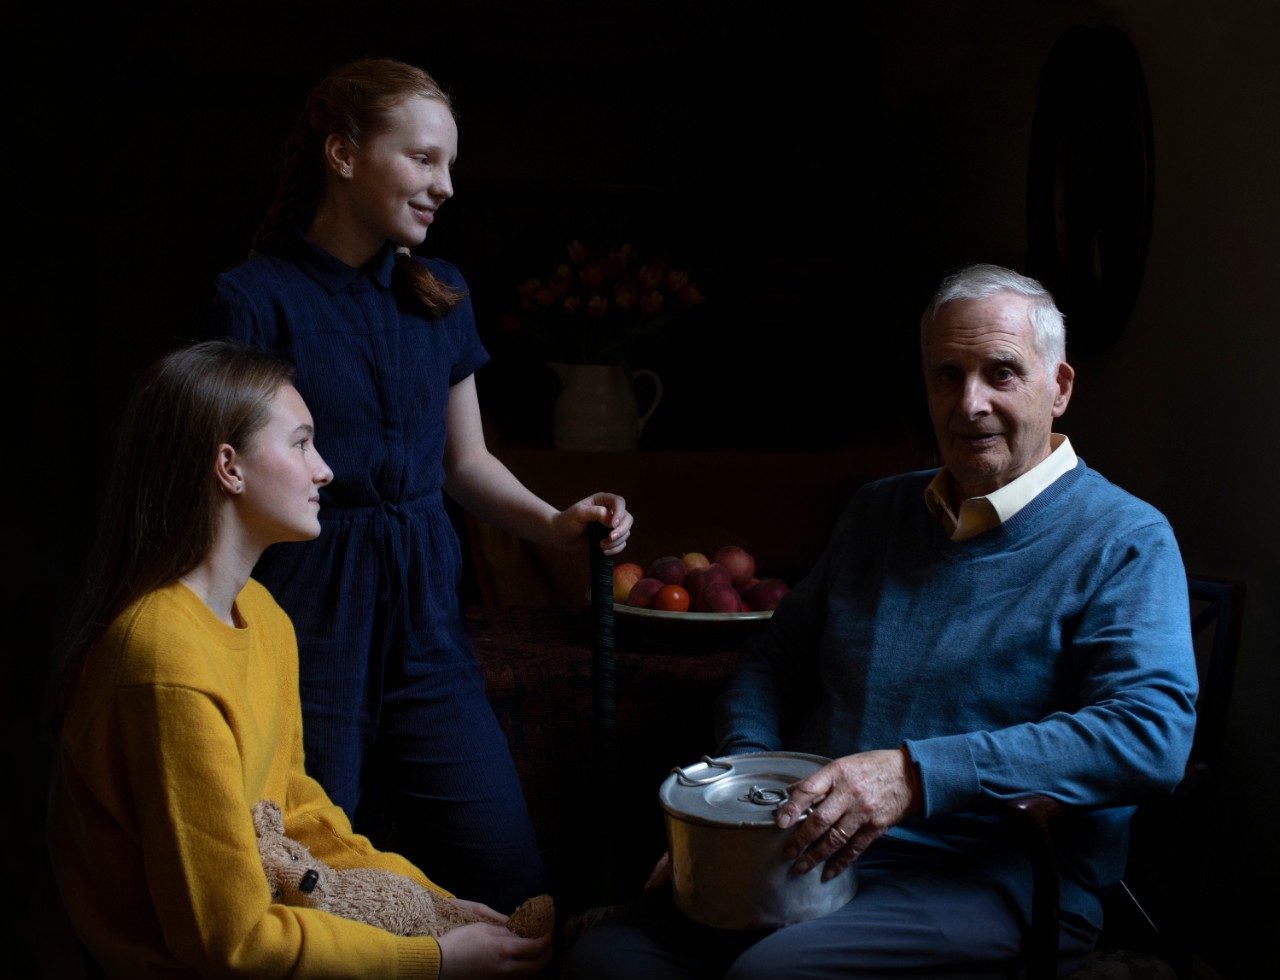 Holocaust survivors and their families feature in new photography project